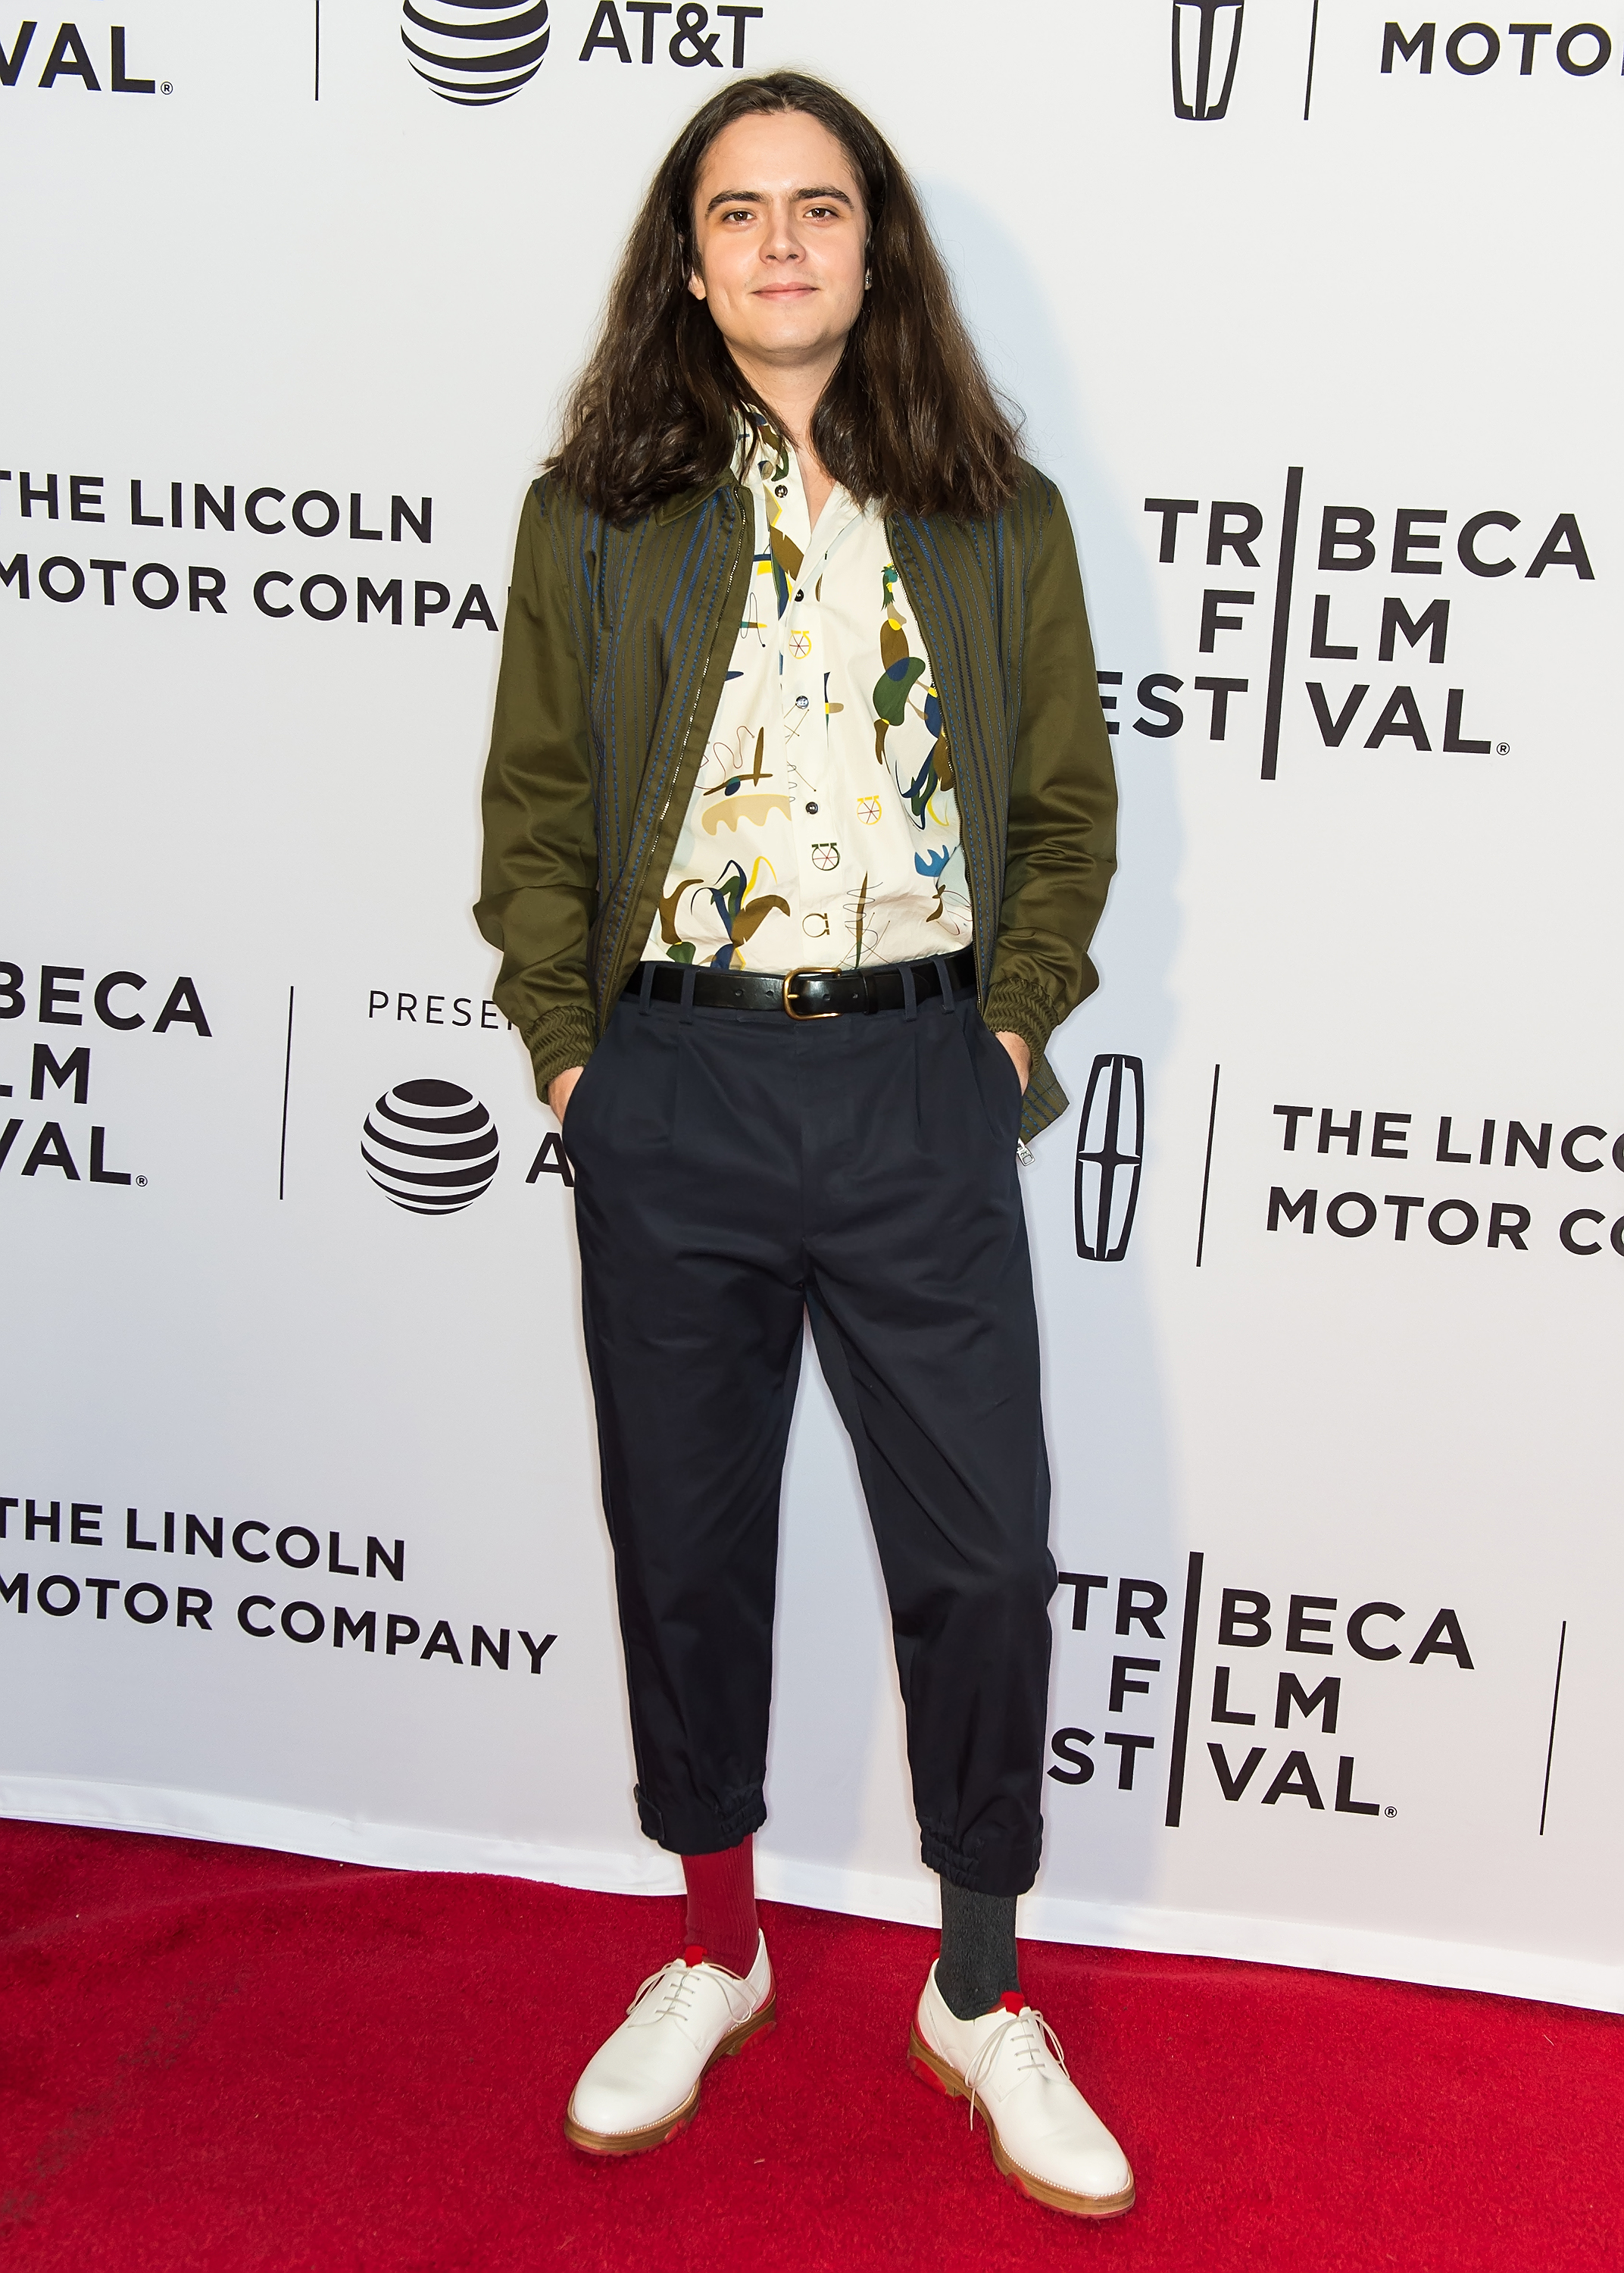 Miles Robbins at the premiere of "My Friend Dahmer," during the 2017 Tribeca Film Festival at Cinepolis Chelsea in New York City on April 21, 2017 | Source: Getty Images